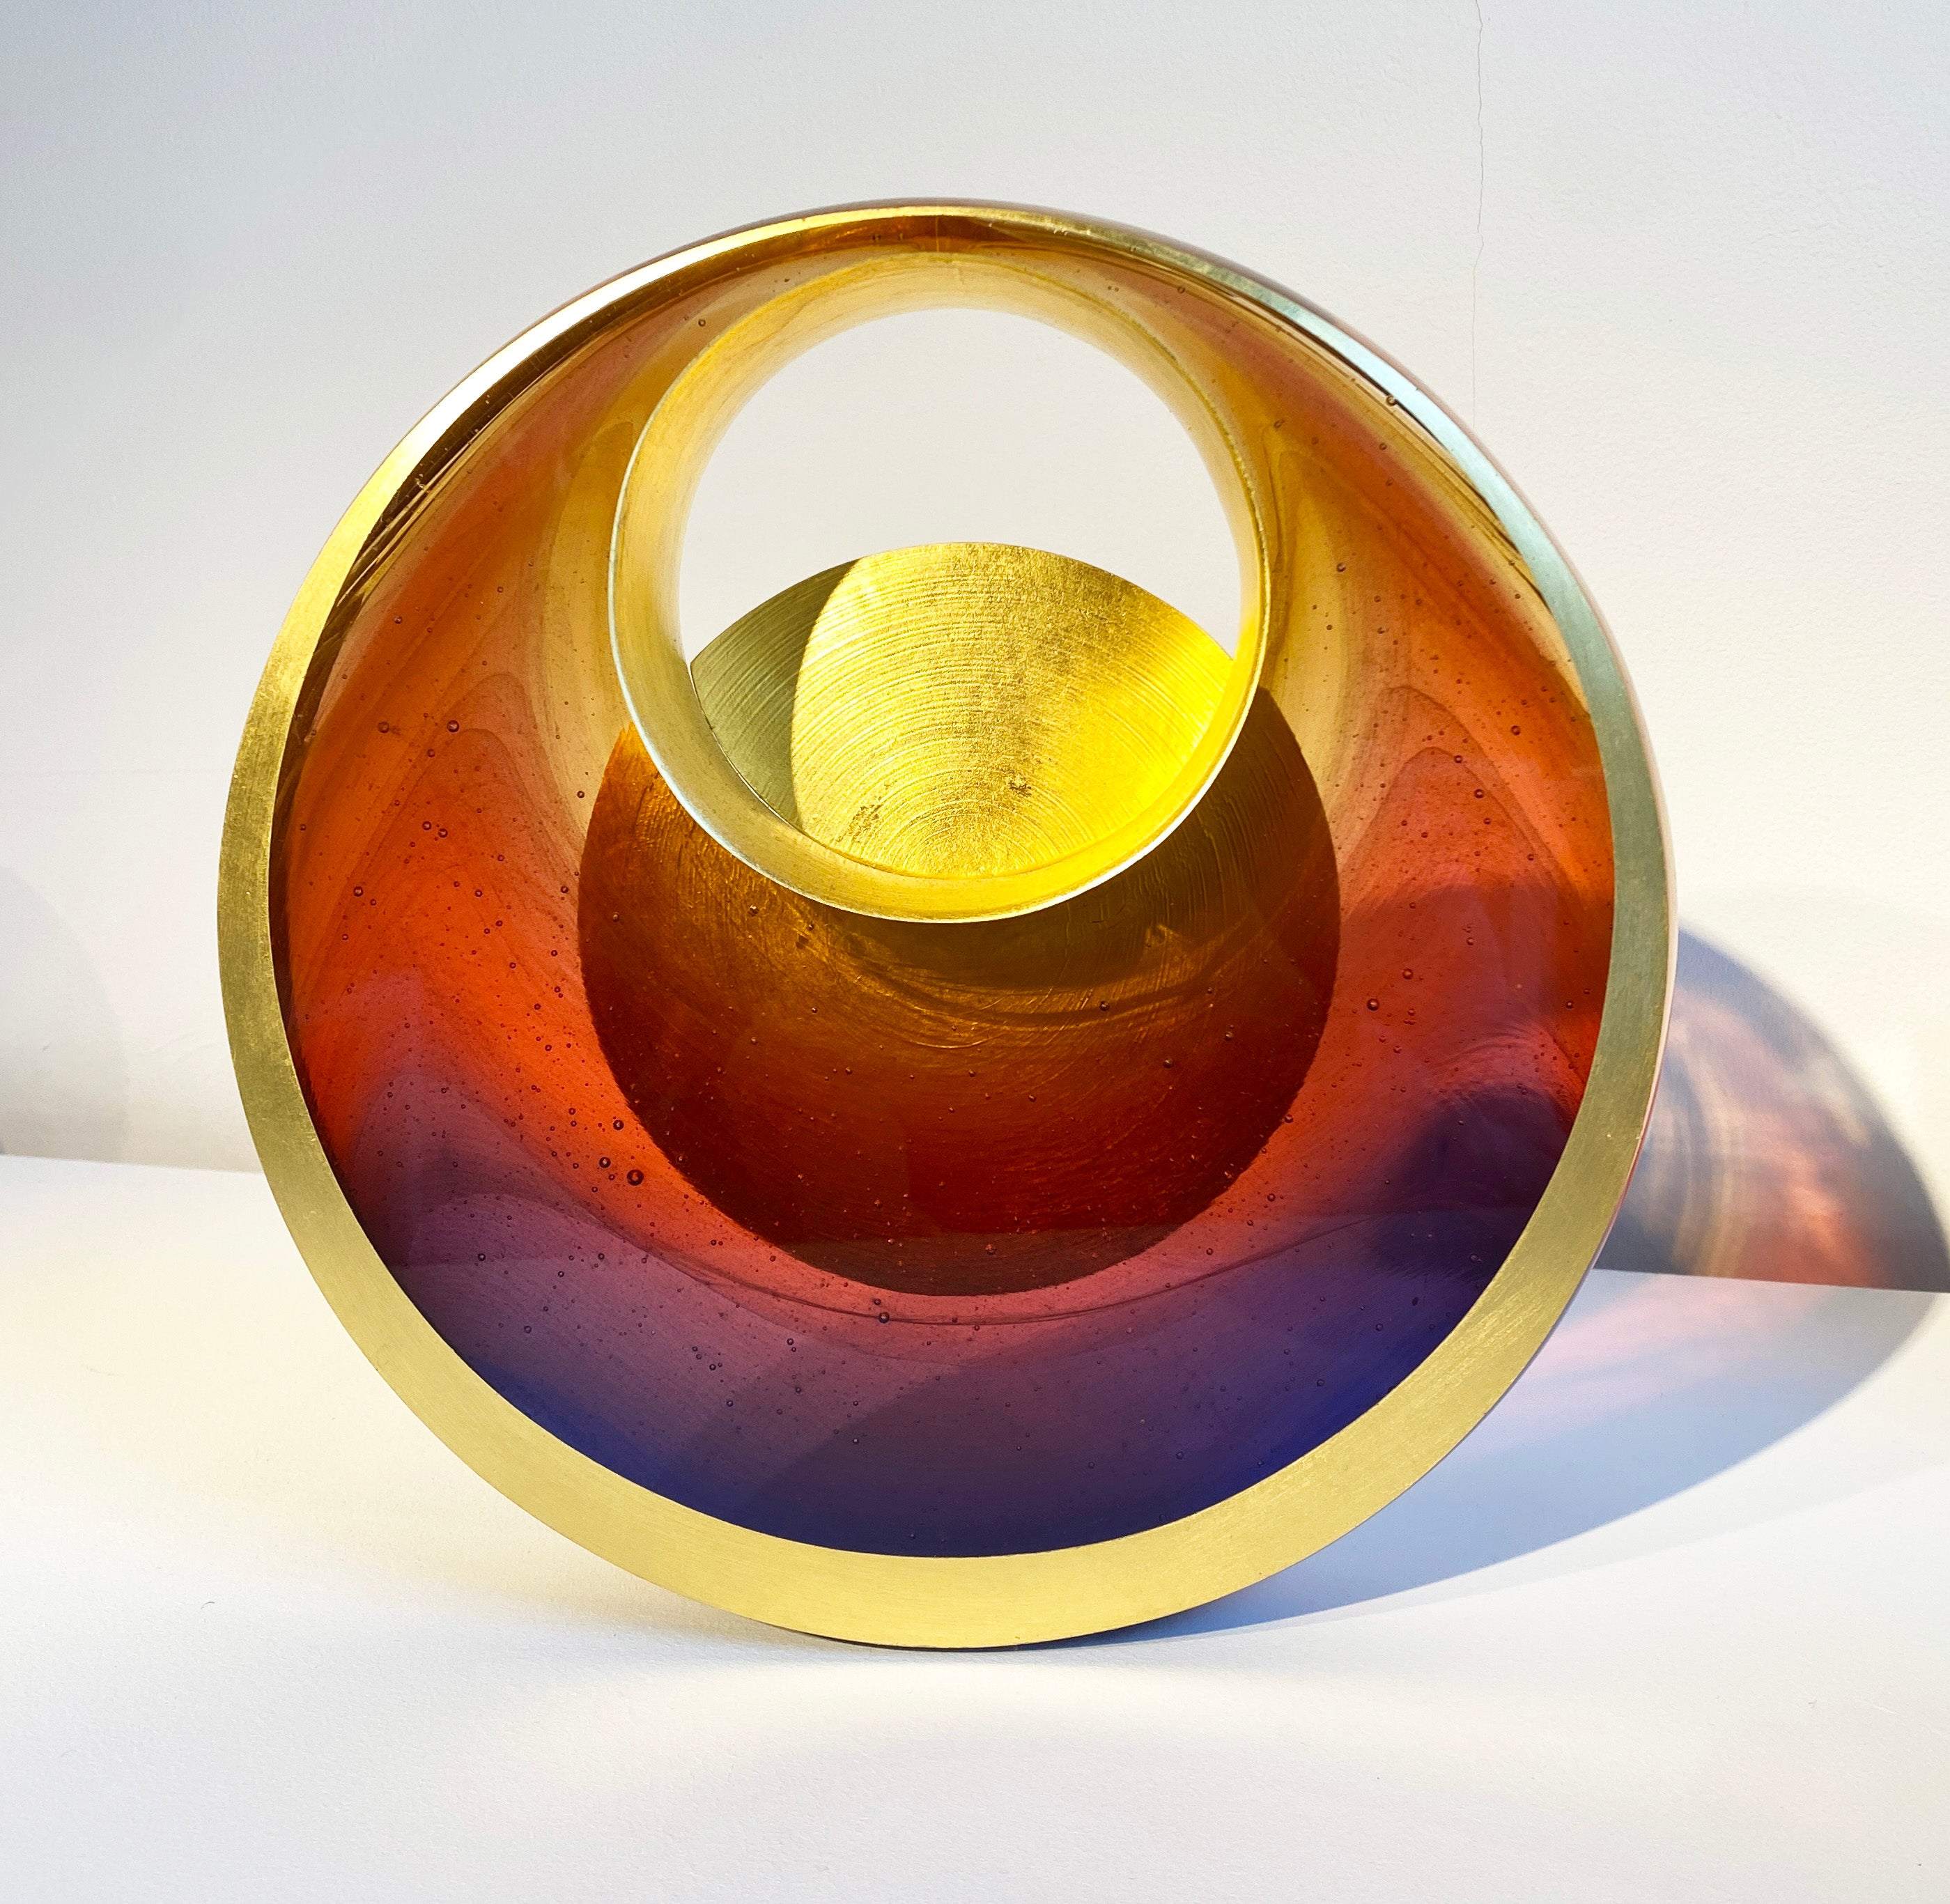 Sabrina Cant, The Sun is God II, £6,500. Please call the gallery to discuss a potential commission.